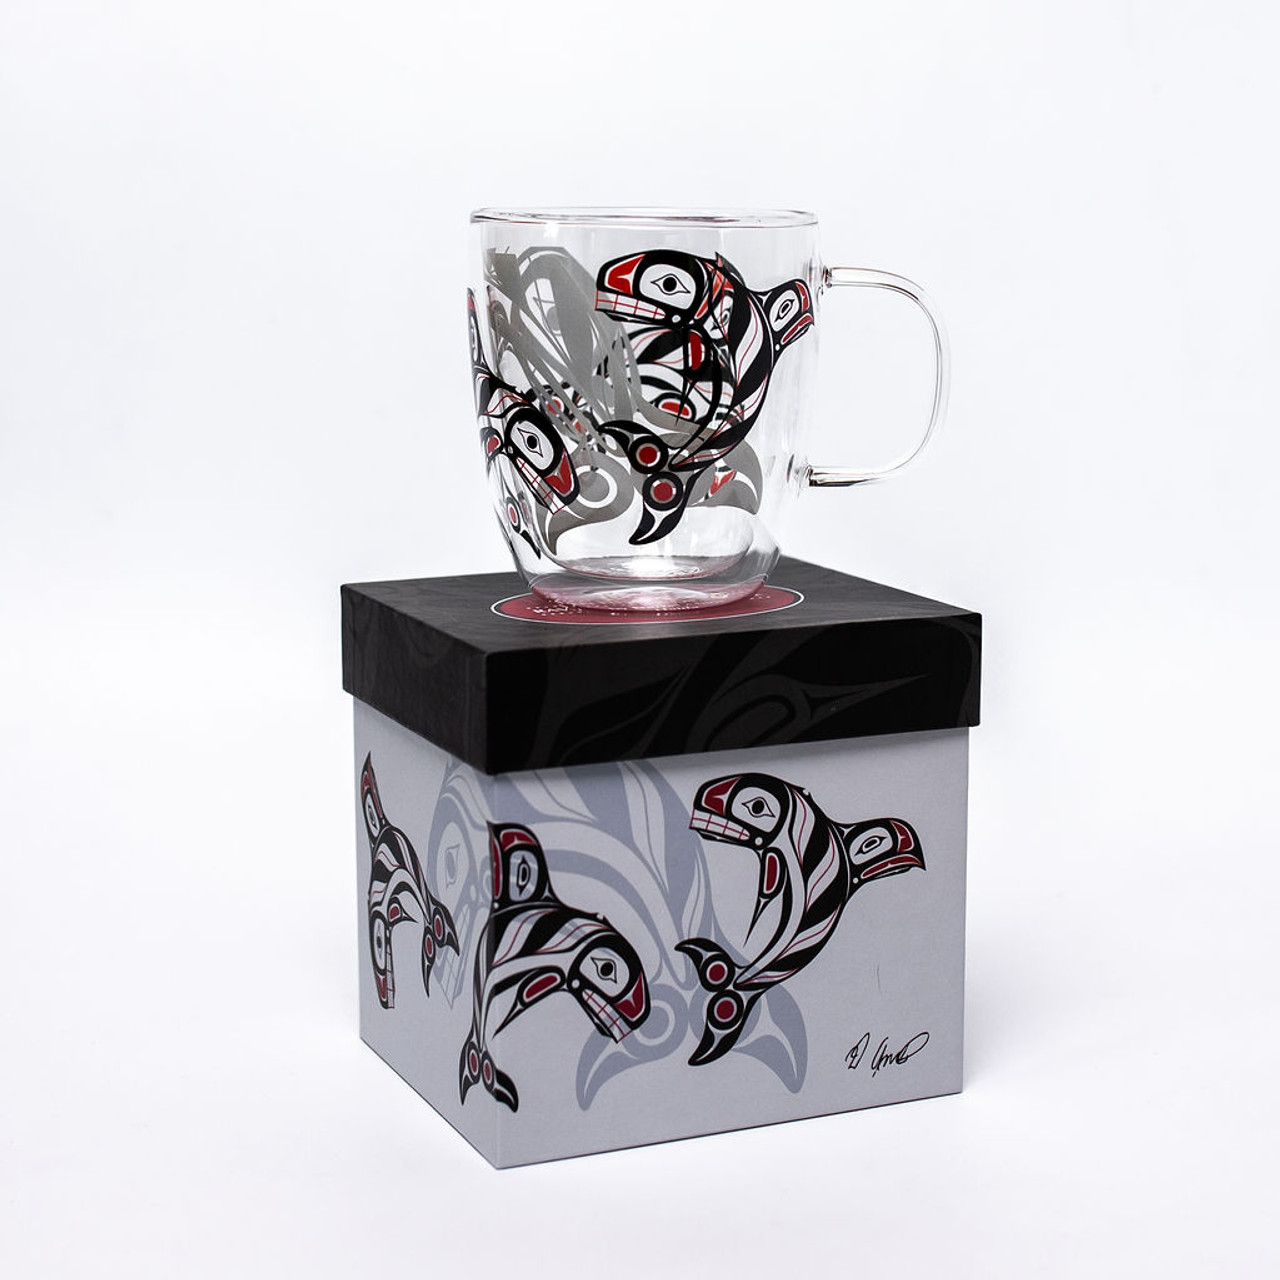 Doubled Walled Glass Mugs by Native Northwest